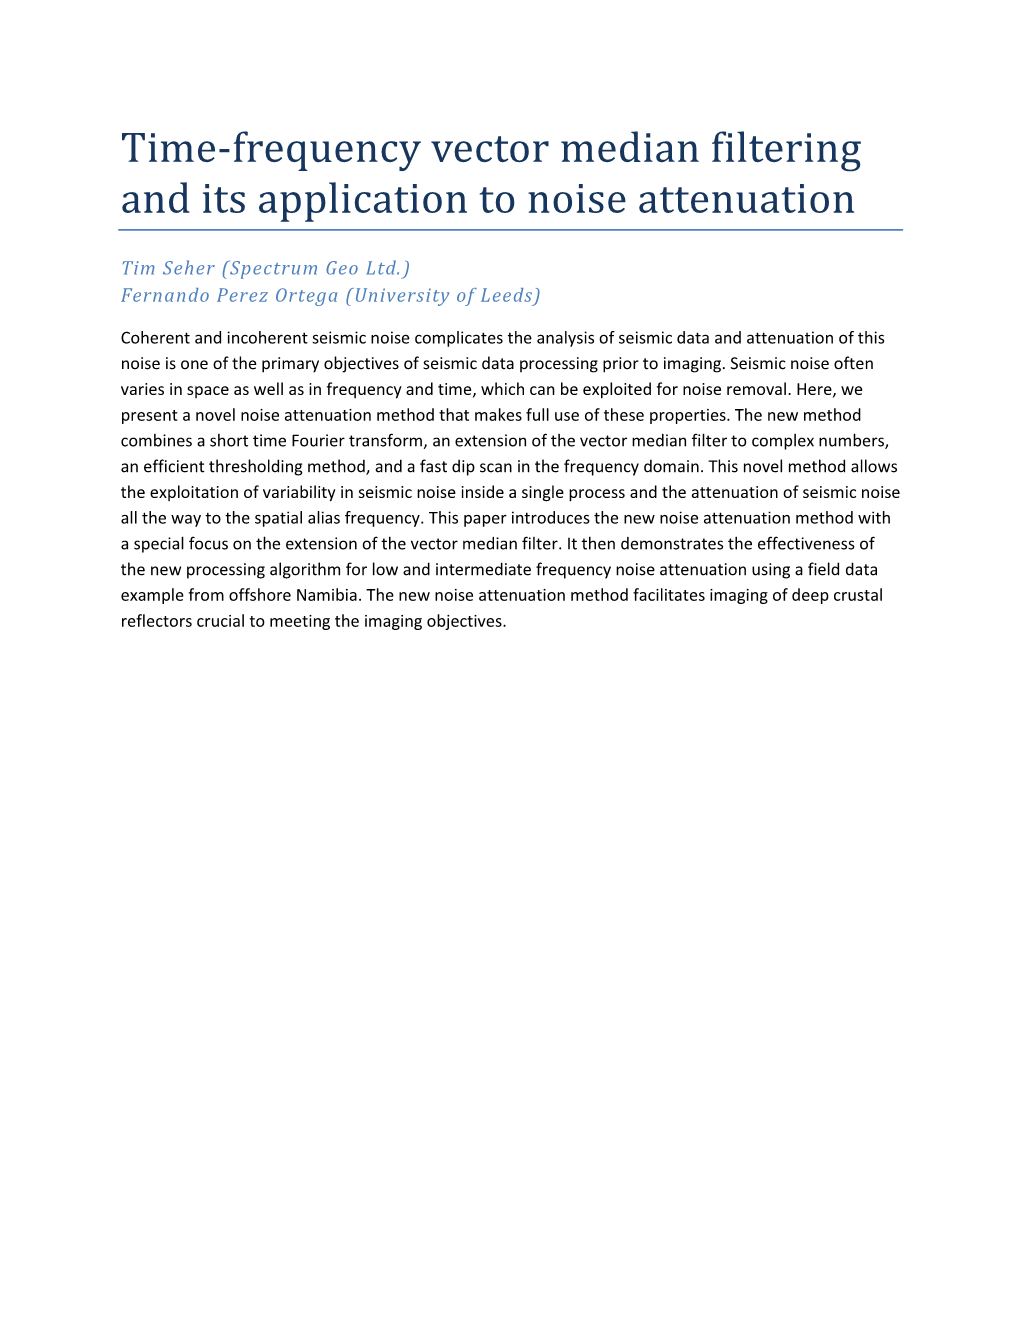 Time-Frequency Vector Median Filtering and Its Application to Noise Attenuation